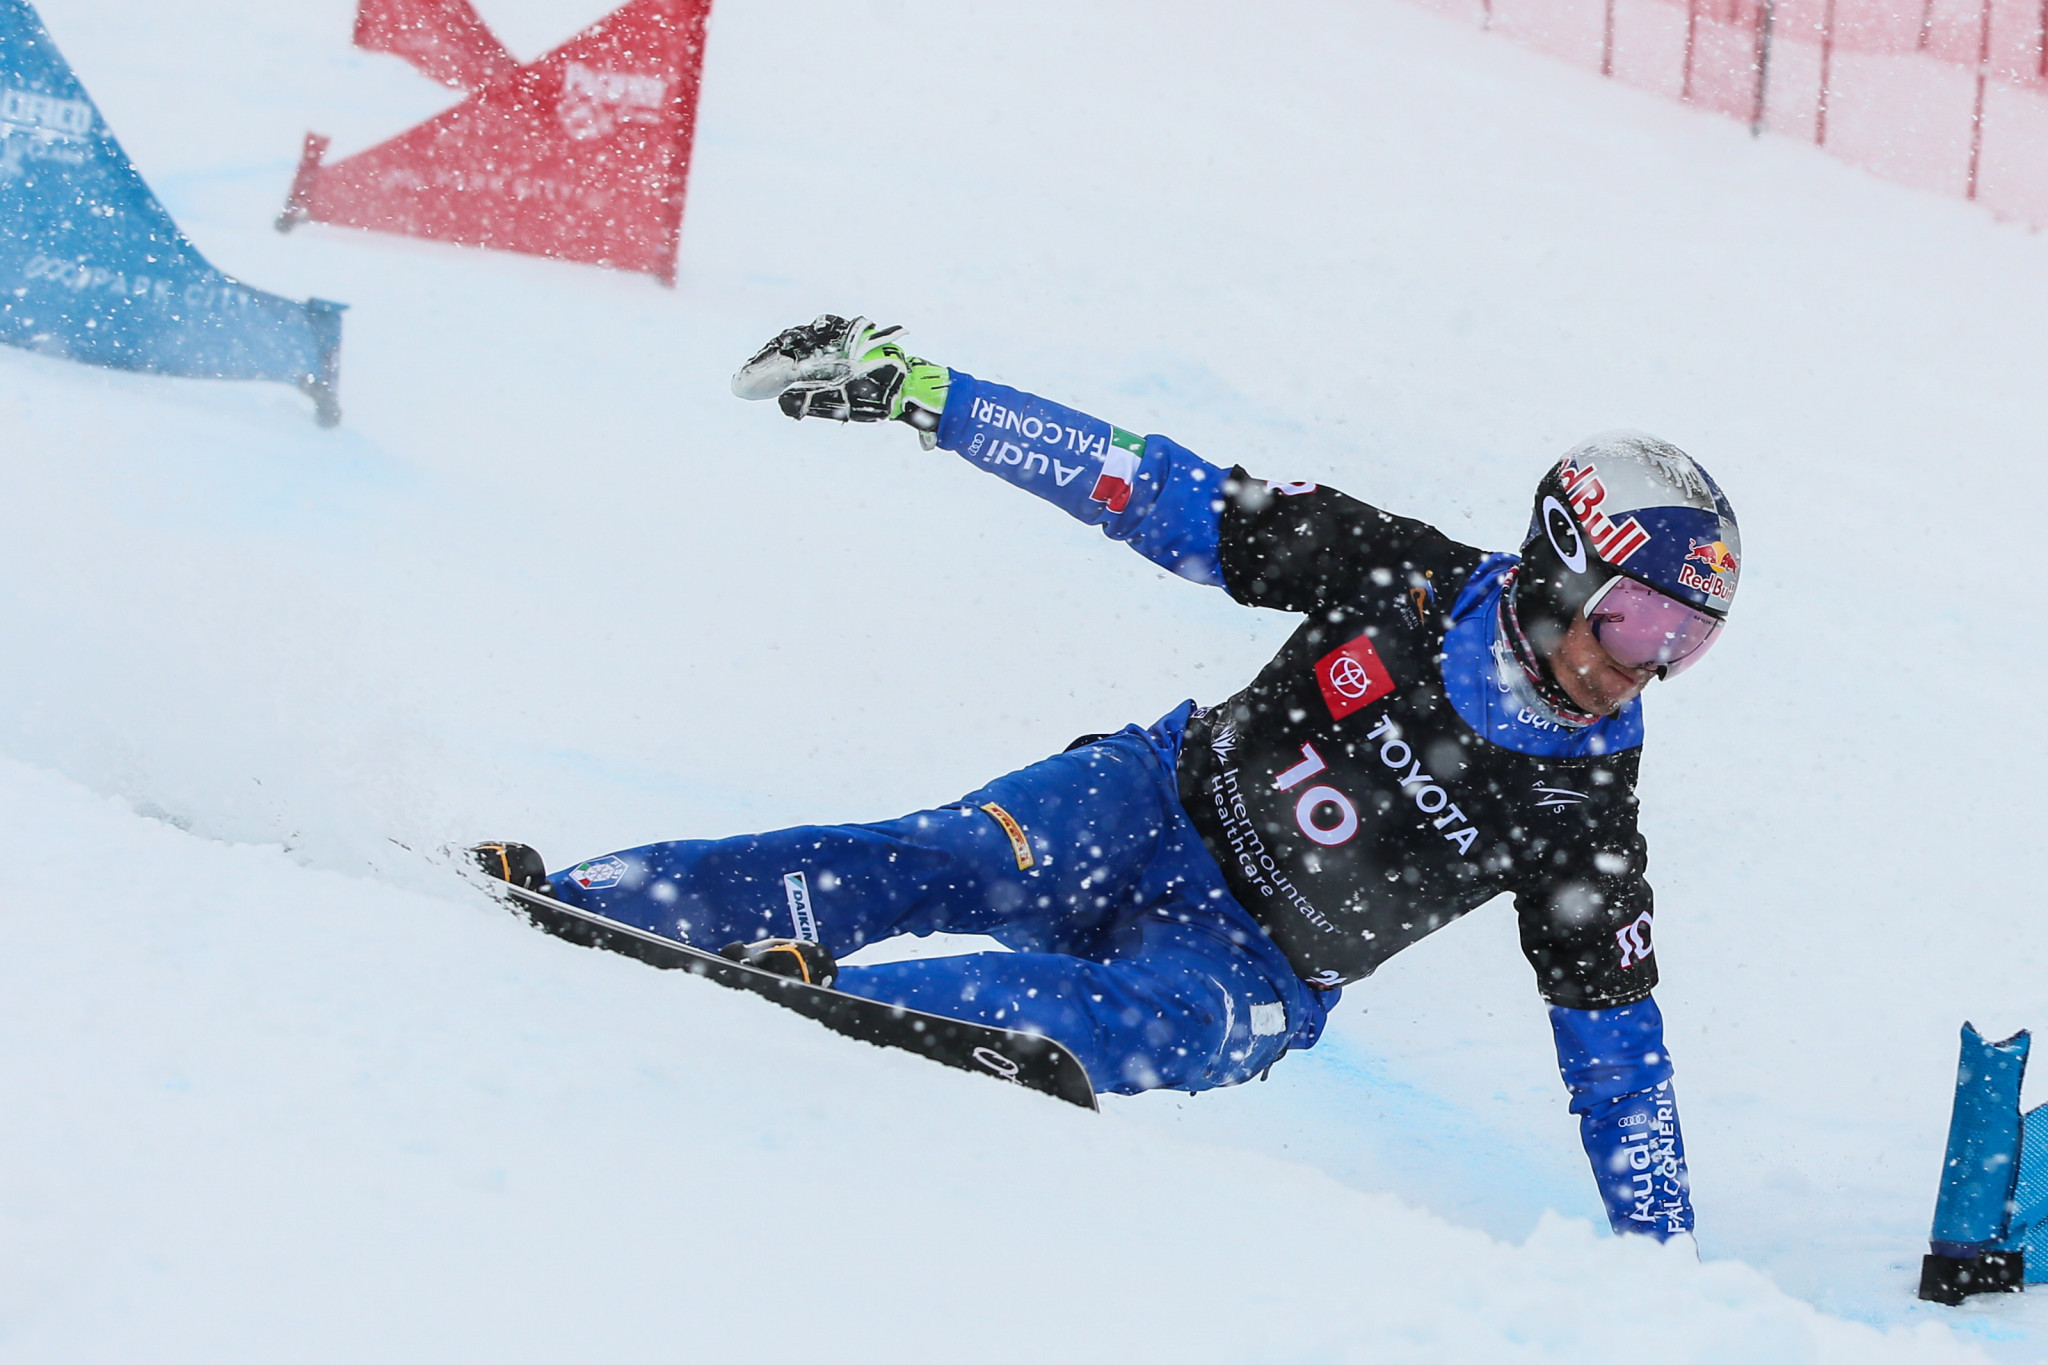 Fischnaller targets Parallel Snowboard World Cup hat-trick on home snow in Carezza